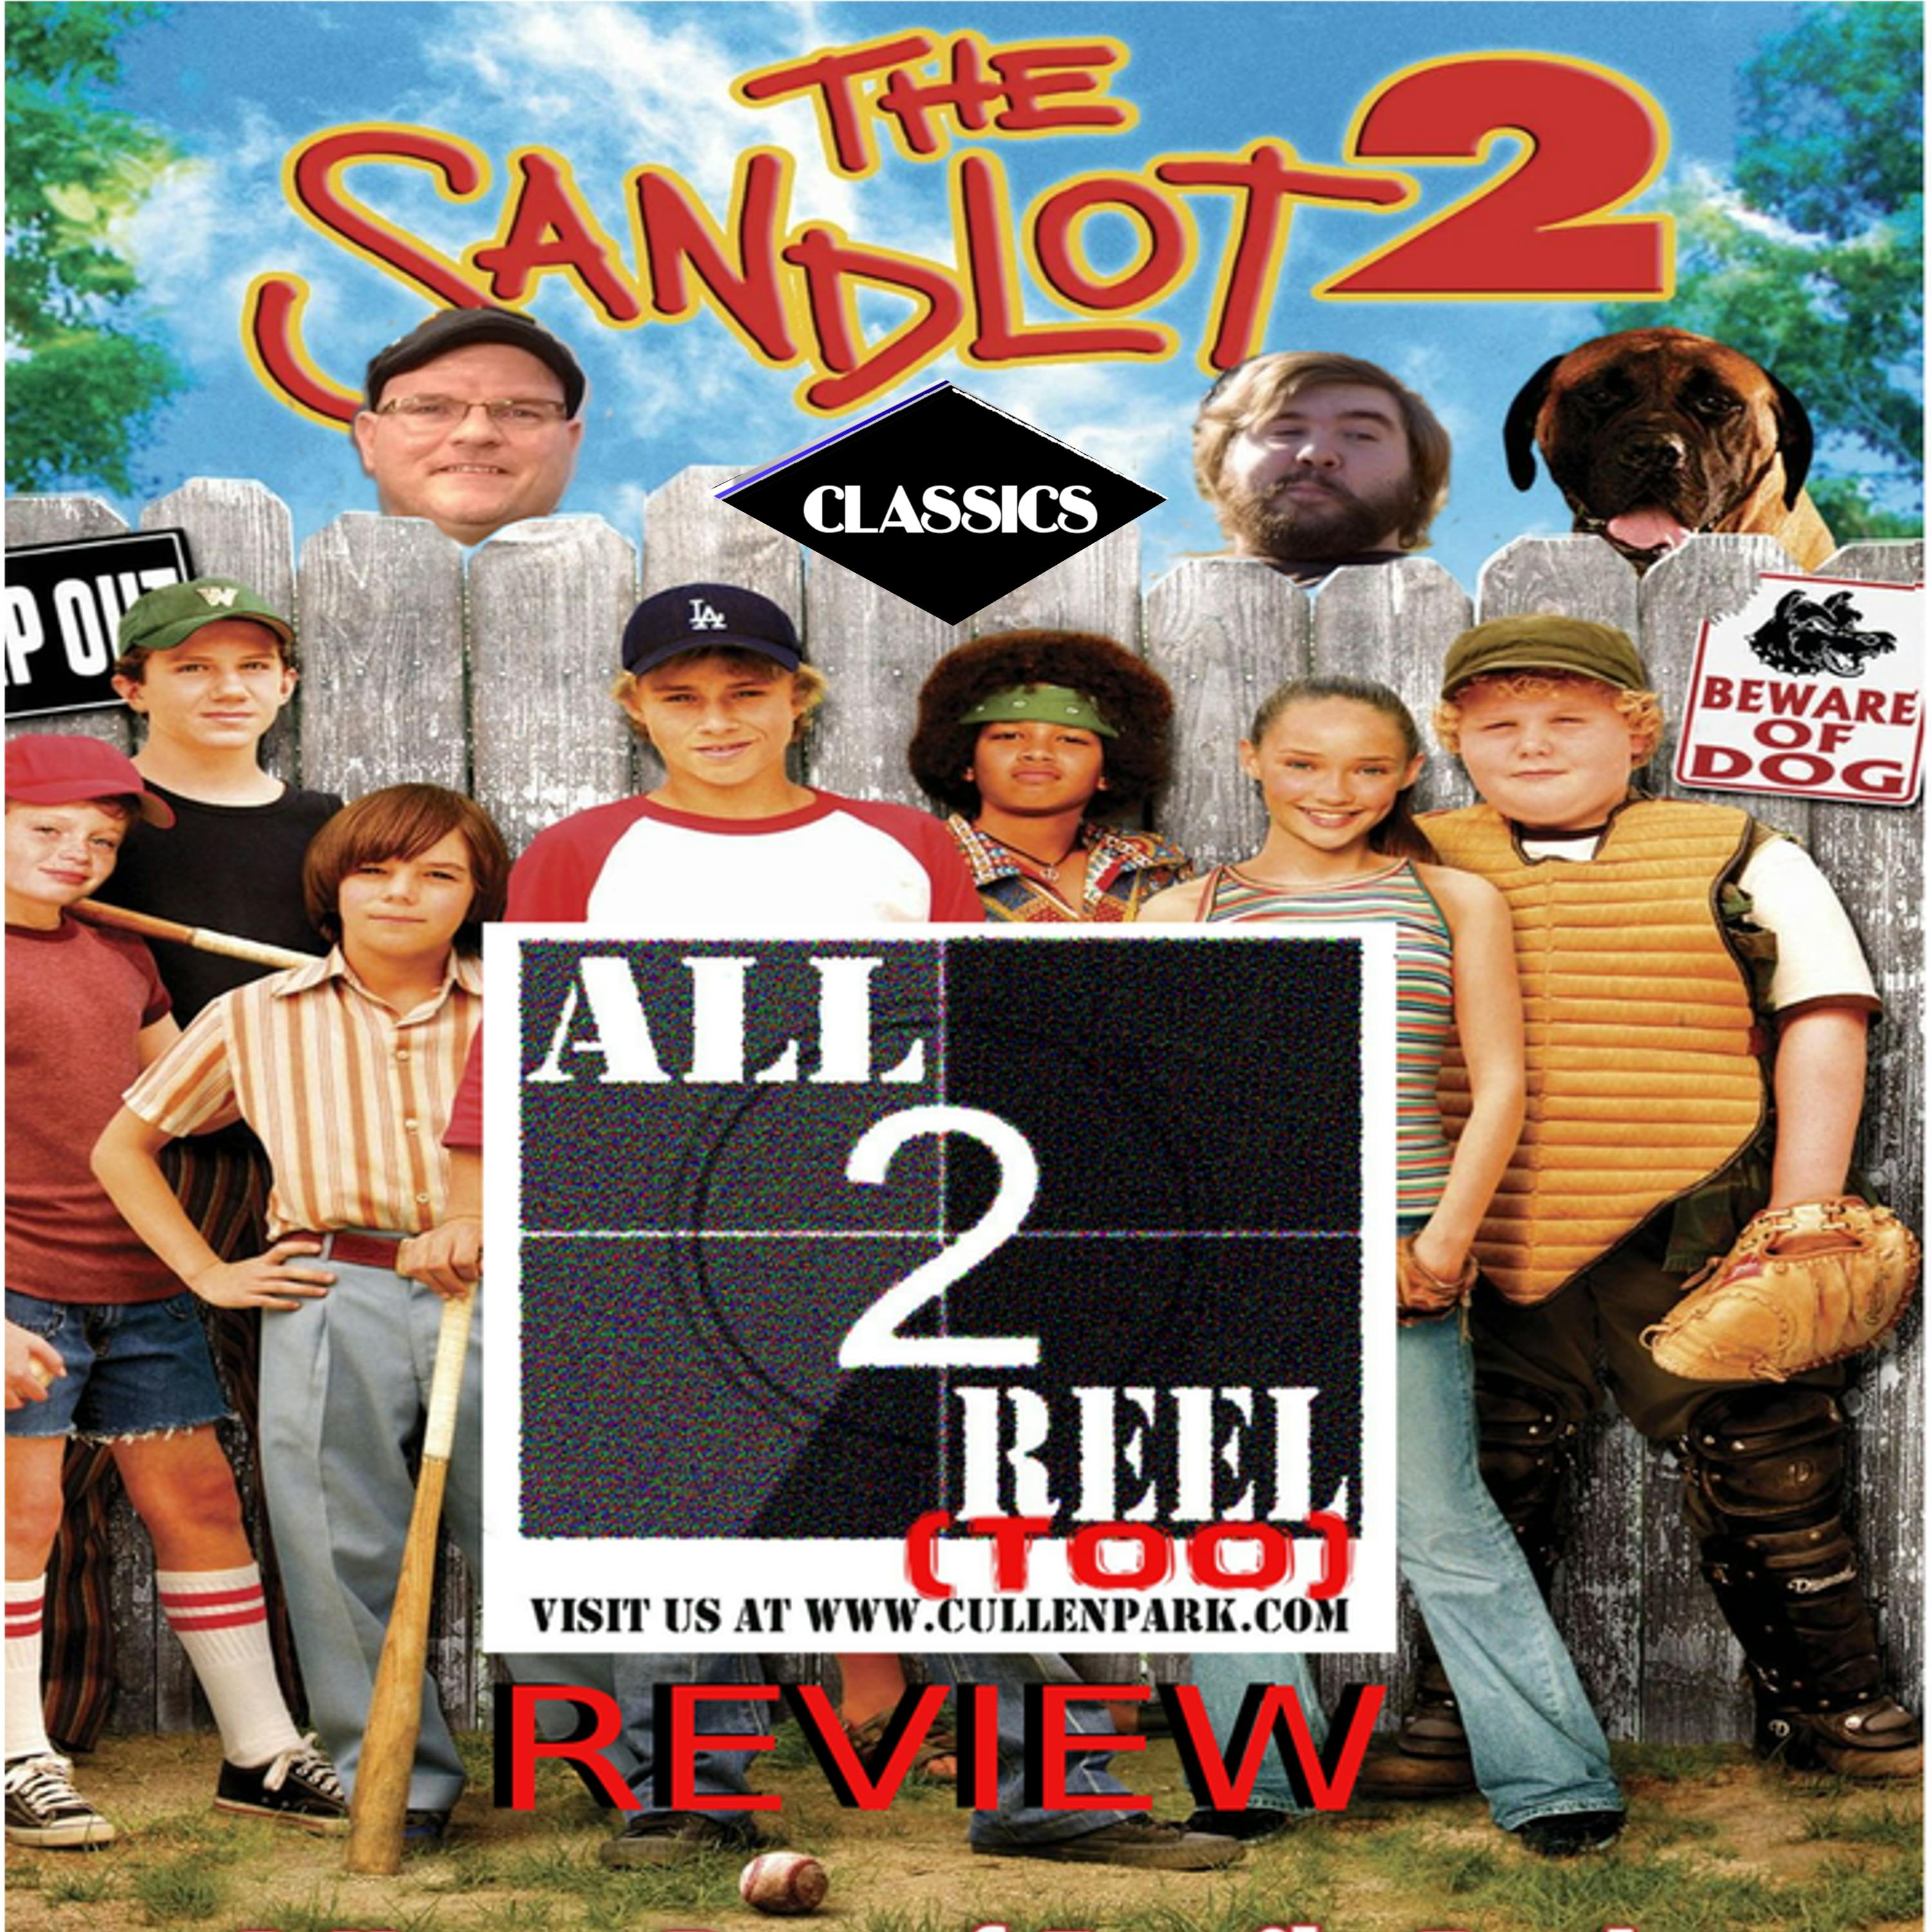 ALL2REELTOO CLASSICS - The Sandlot 2 (2005) - Direct from Hell Image